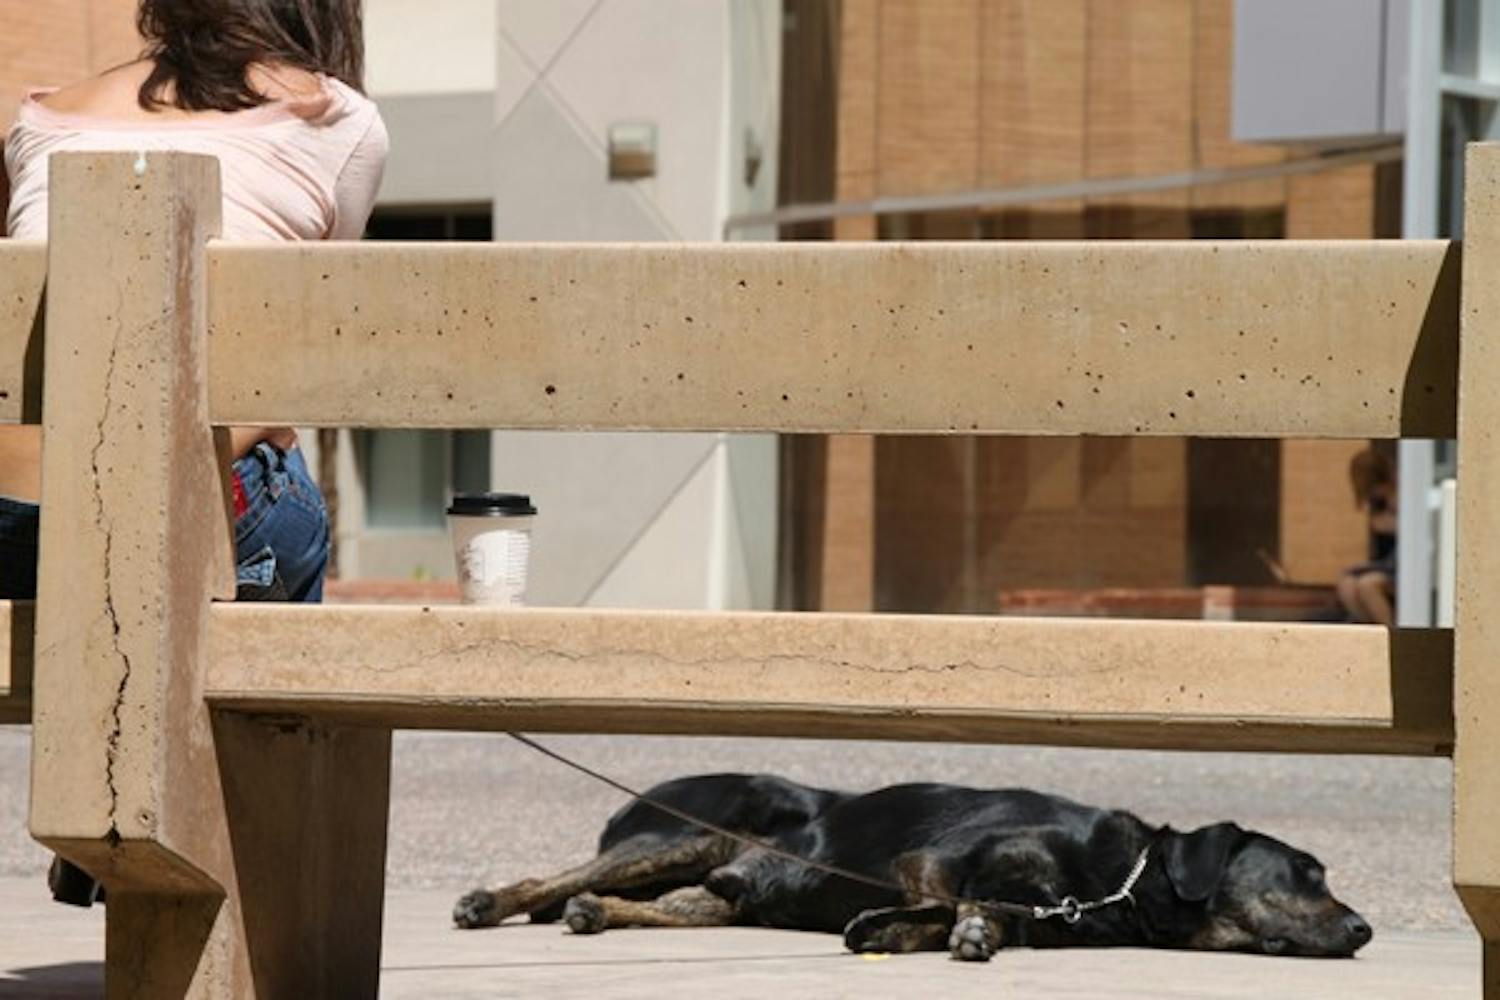 A dog and his owner sit down for a coffee break outside of the Physical Sciences building on the Tempe campus Tuesday afternoon. (Photo by Rosie Gochnour)